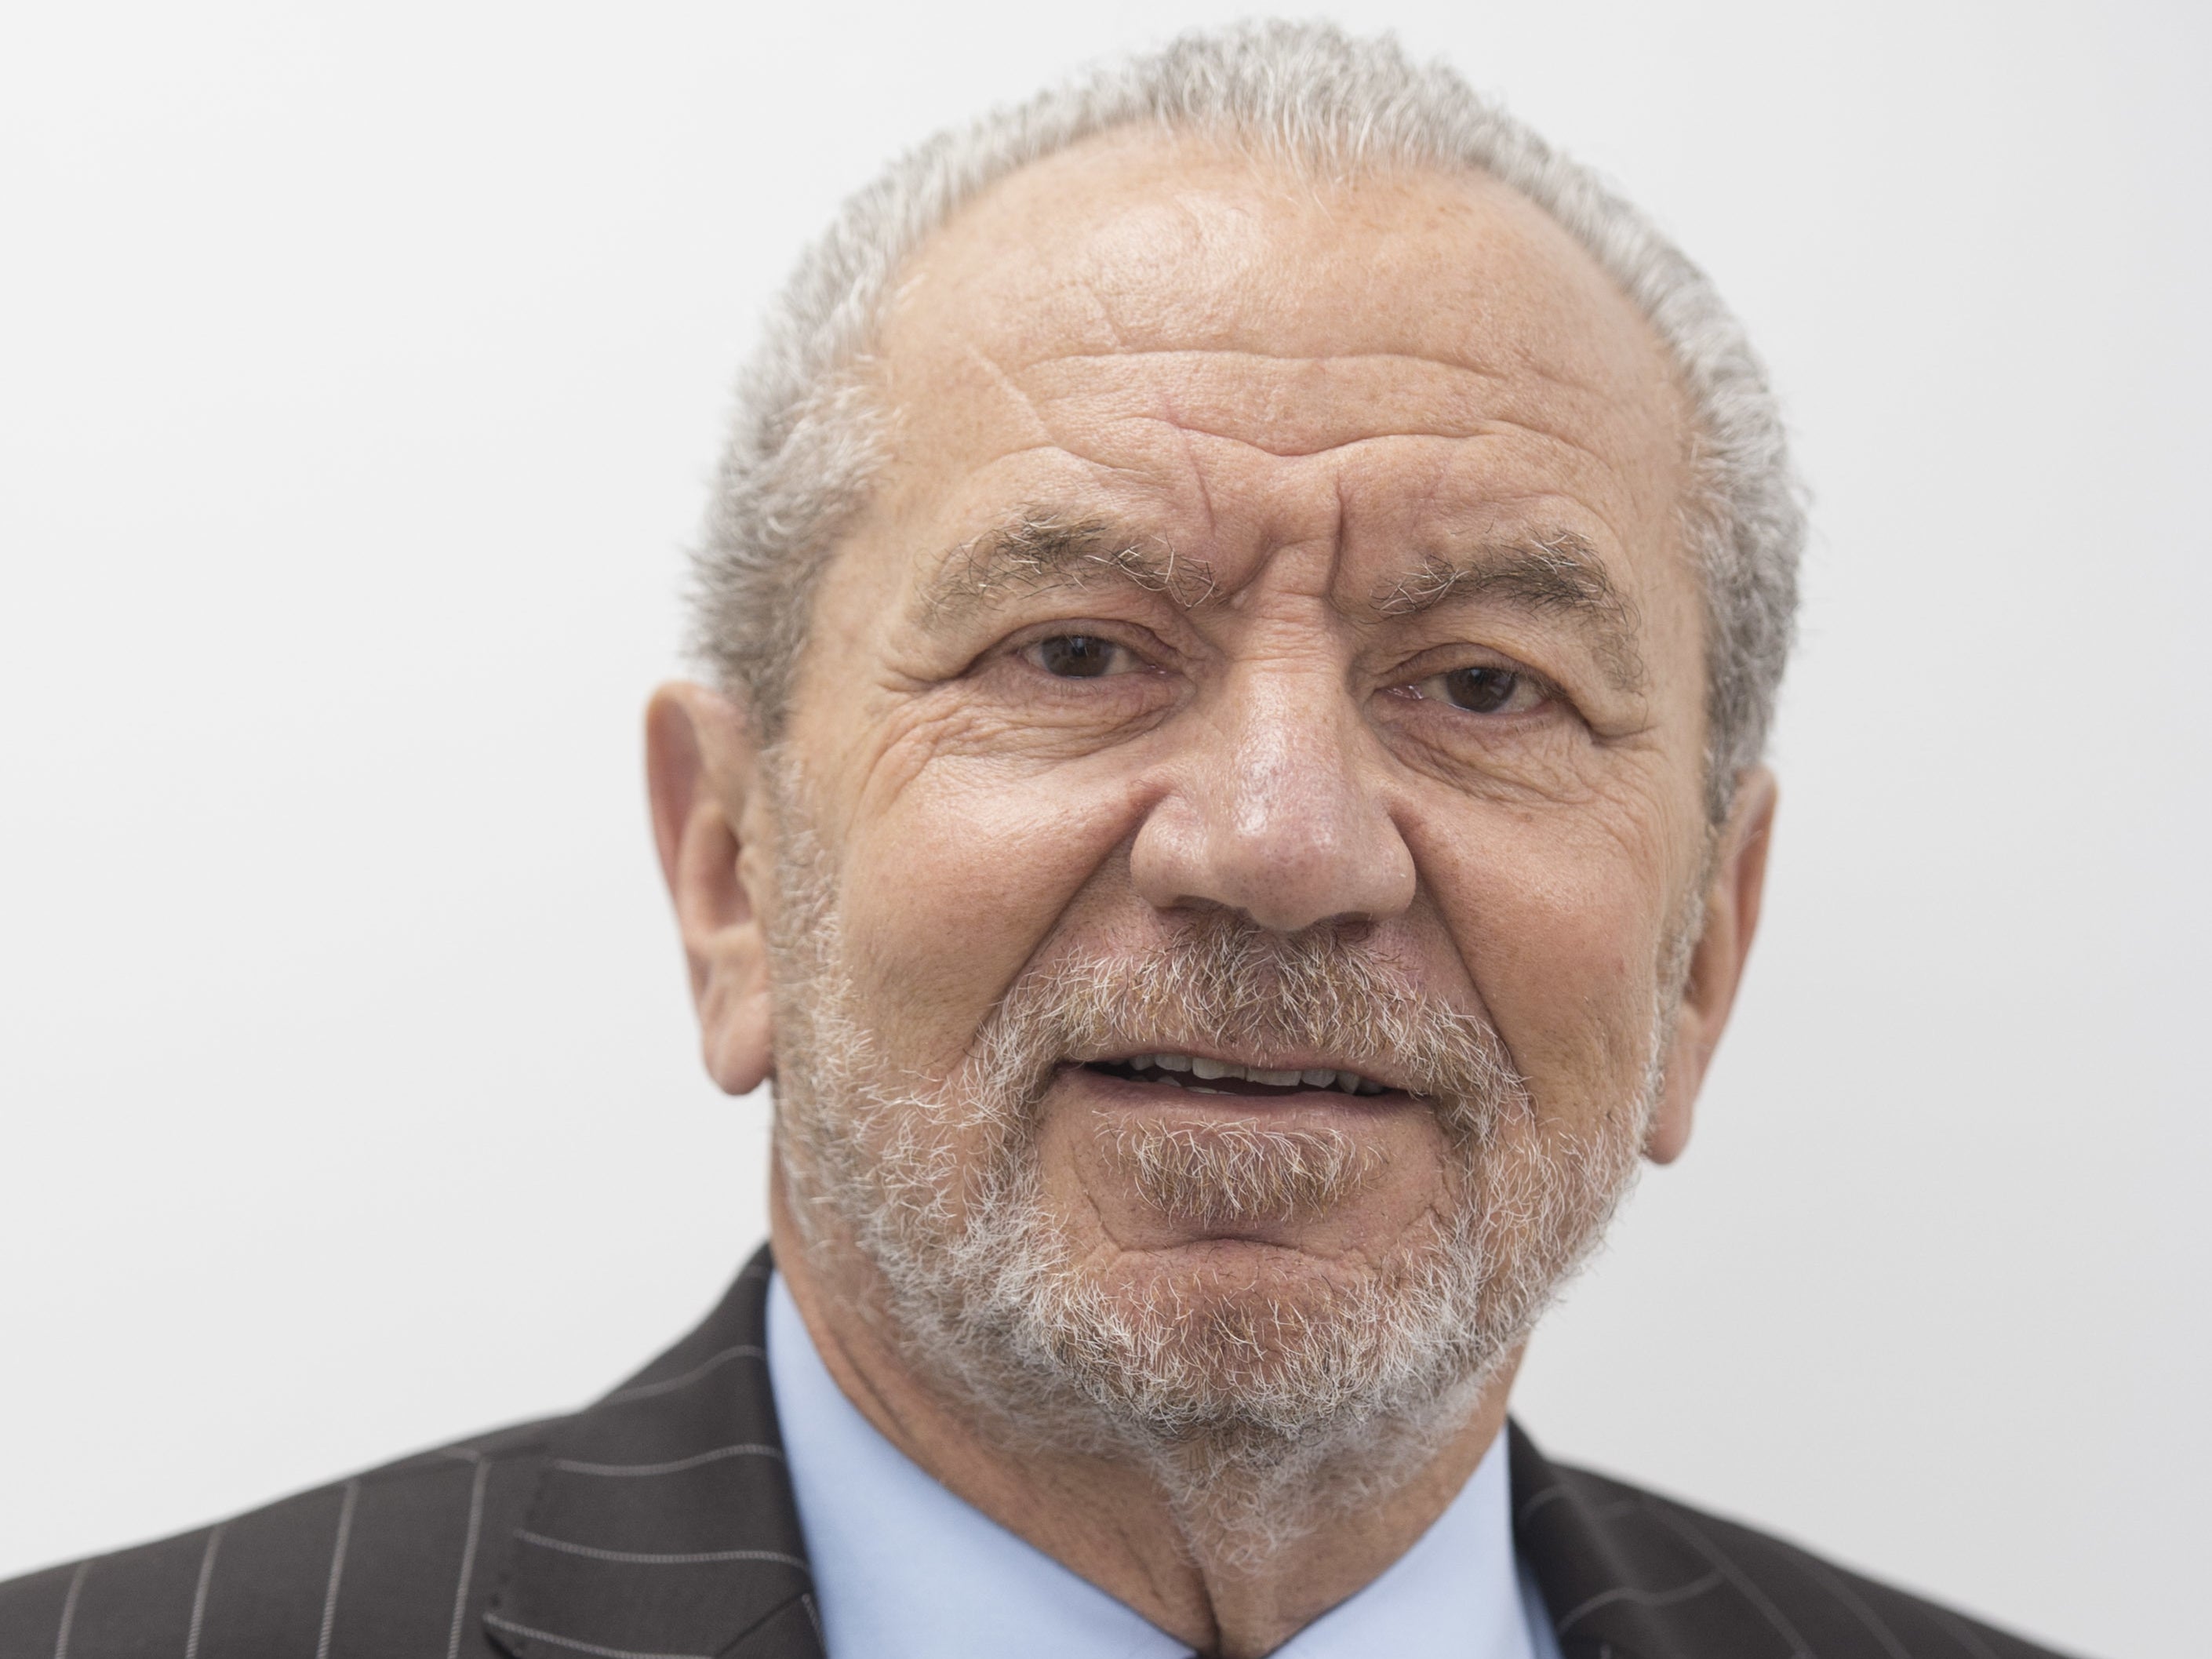 Lord Alan Sugar was sent three hate-filled antisemitic letters